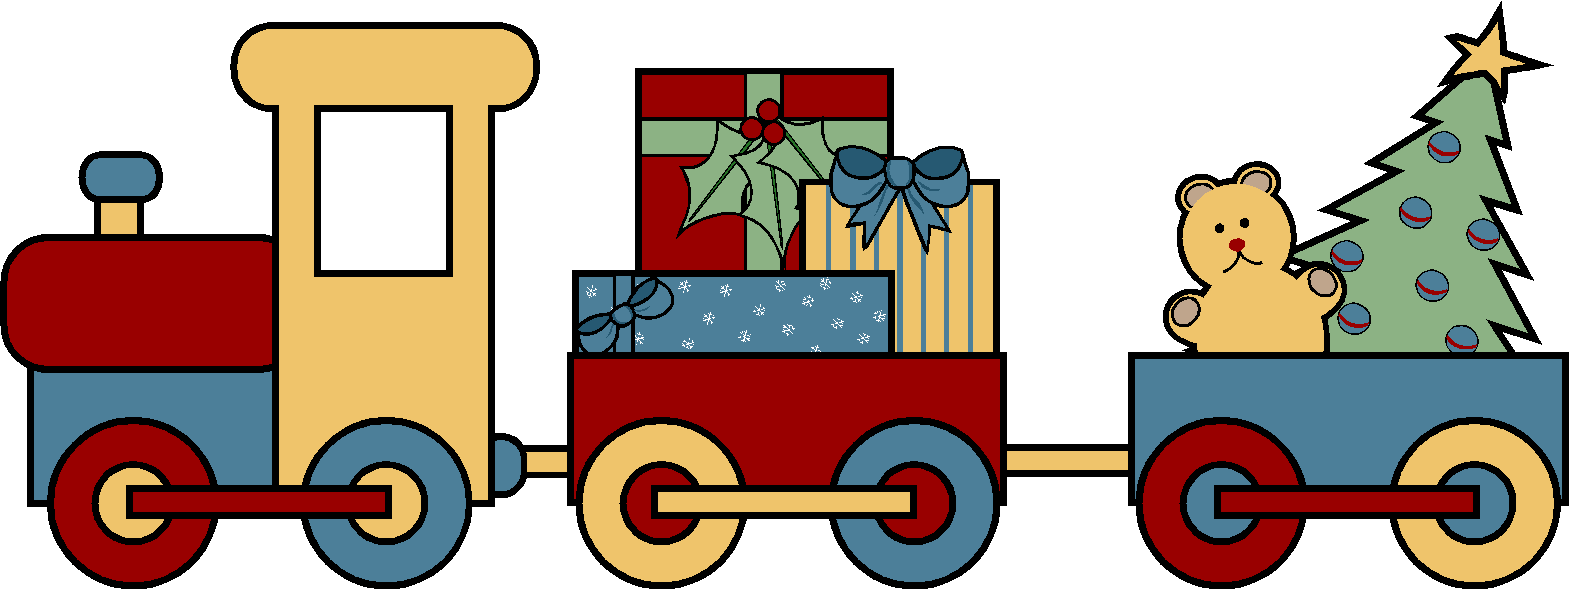 Clipart free train. Image of choo toy